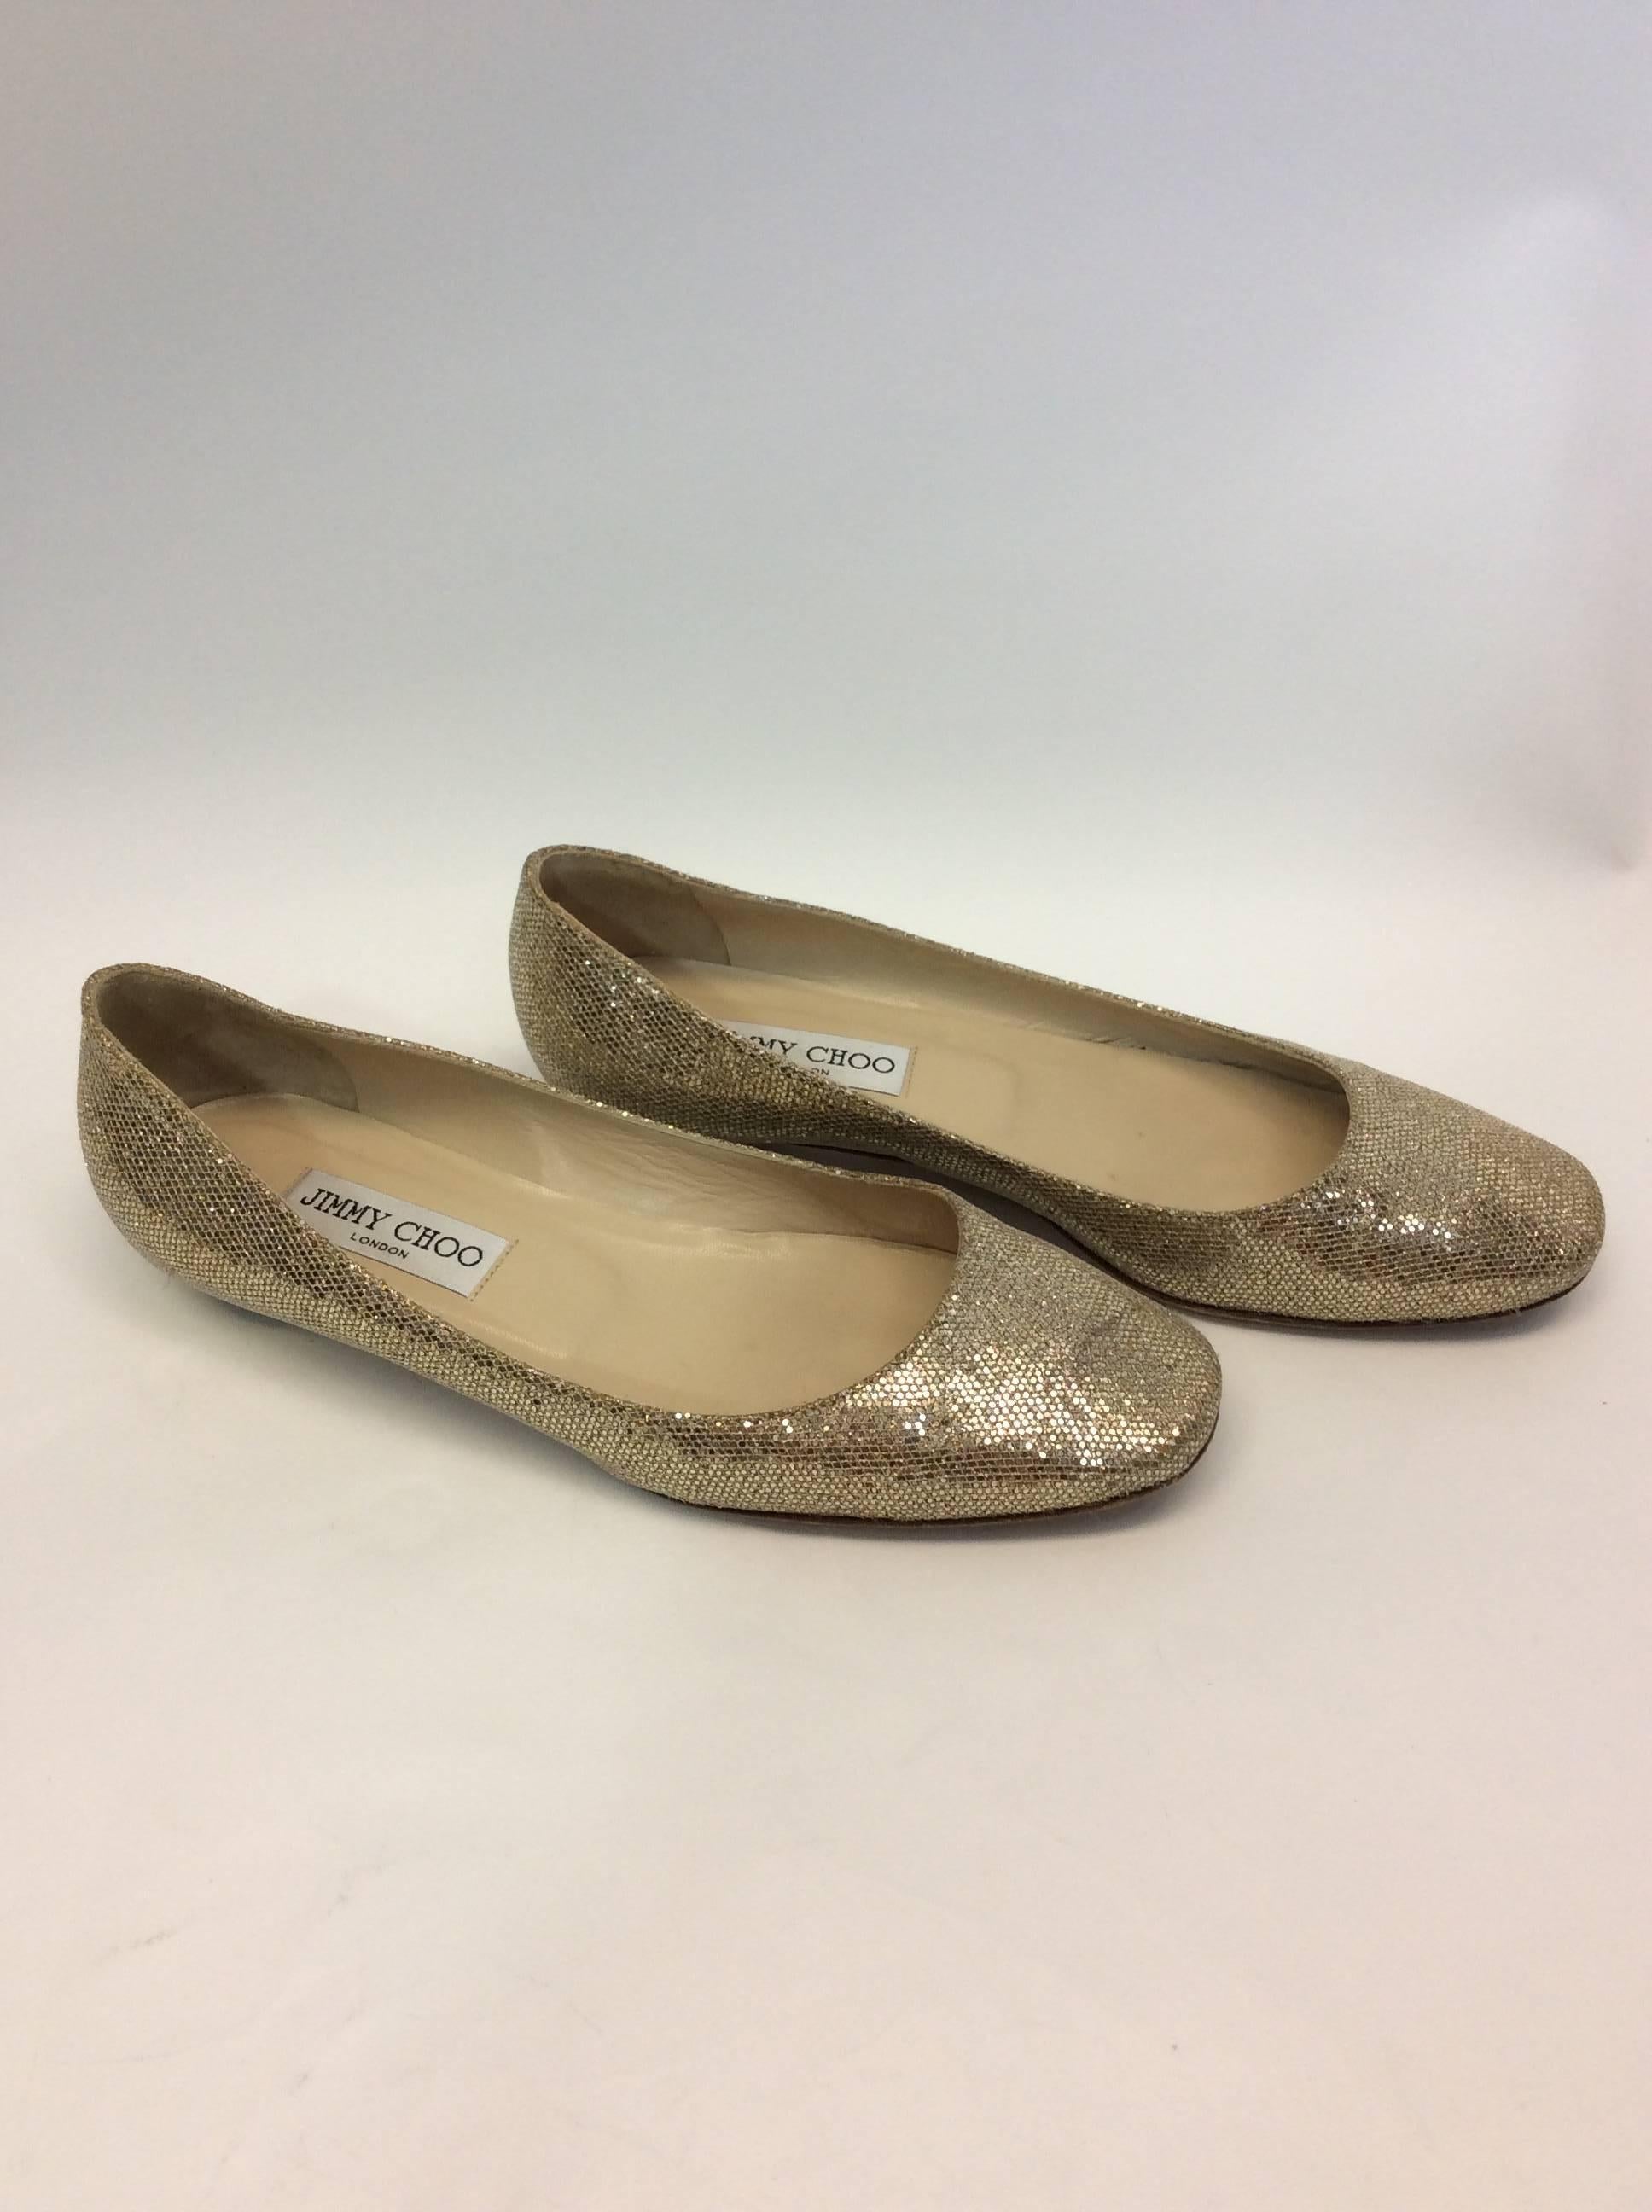 Jimmy Choo Gold Shimmer Metallic Flats In Excellent Condition For Sale In Narberth, PA